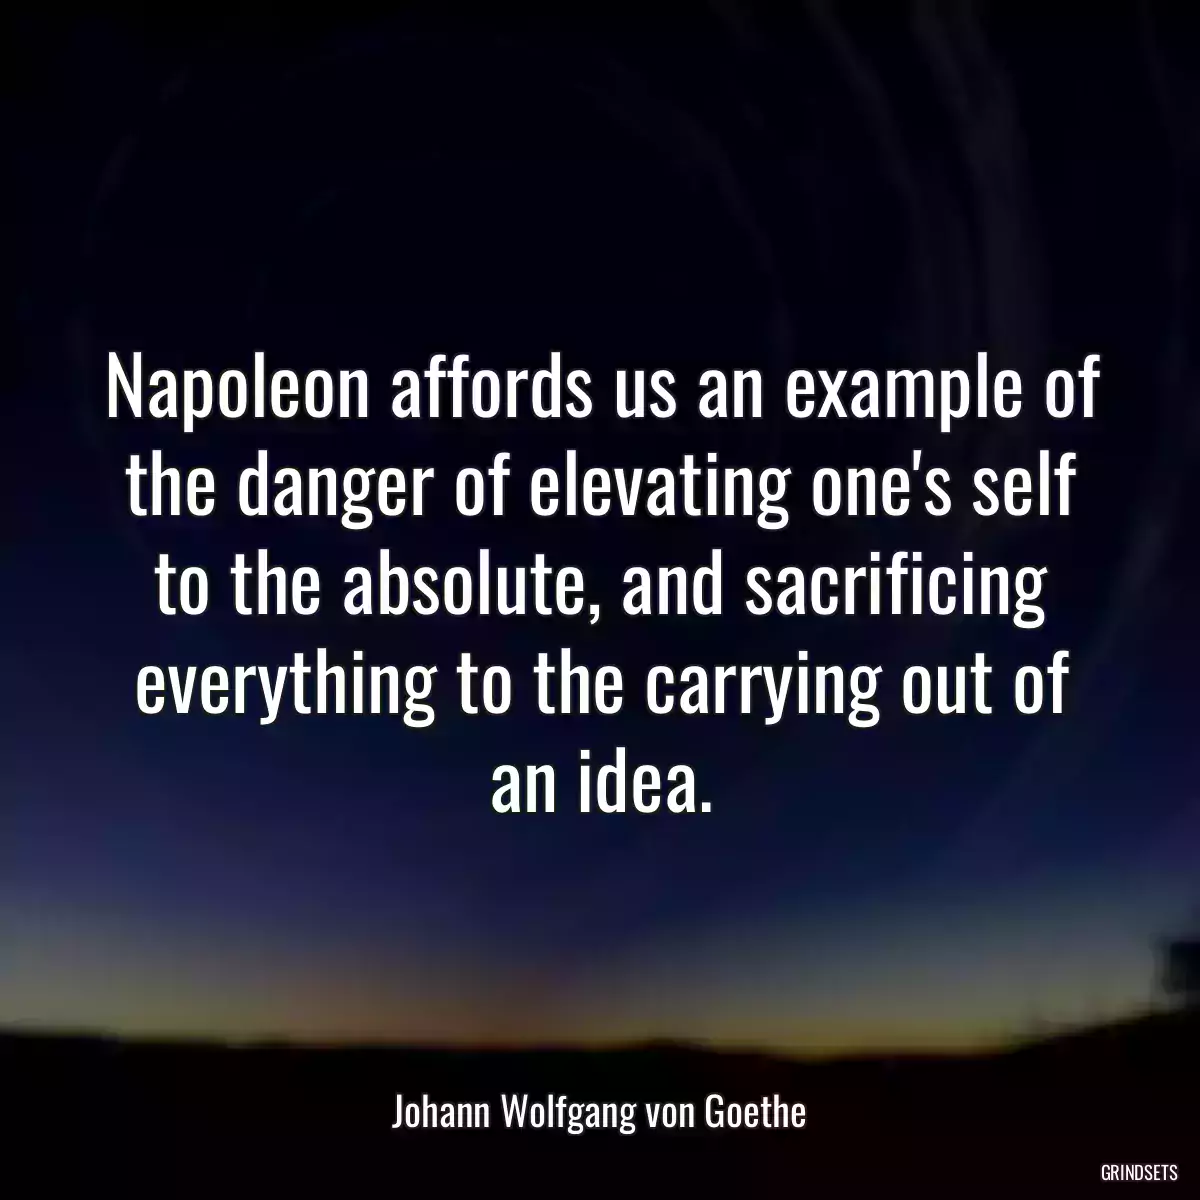 Napoleon affords us an example of the danger of elevating one\'s self to the absolute, and sacrificing everything to the carrying out of an idea.